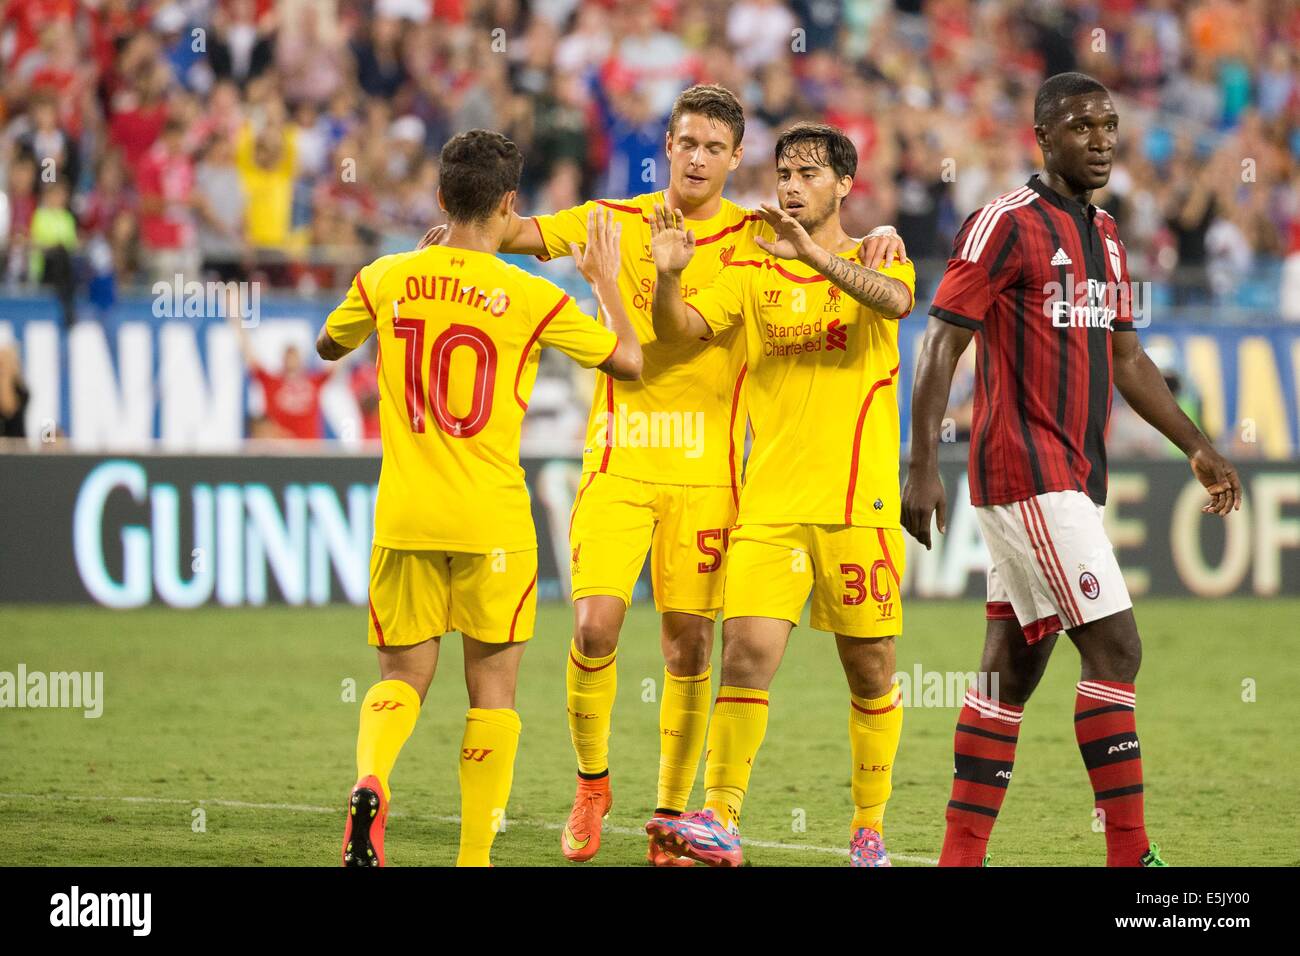 Charlotte, North Carolina, USA. 2nd Aug, 2014. Liverpool Forward JESUS FERNANDEZ SAEZ SUSO (30) celebrates with teammates after scoring during the 2014 Guinness International Champions Cup match between AC Milan and Liverpool at Bank of America Stadium in Charlotte, NC. Liverpool goes on to win 2 to 0. Credit:  Jason Walle/ZUMA Wire/Alamy Live News Stock Photo